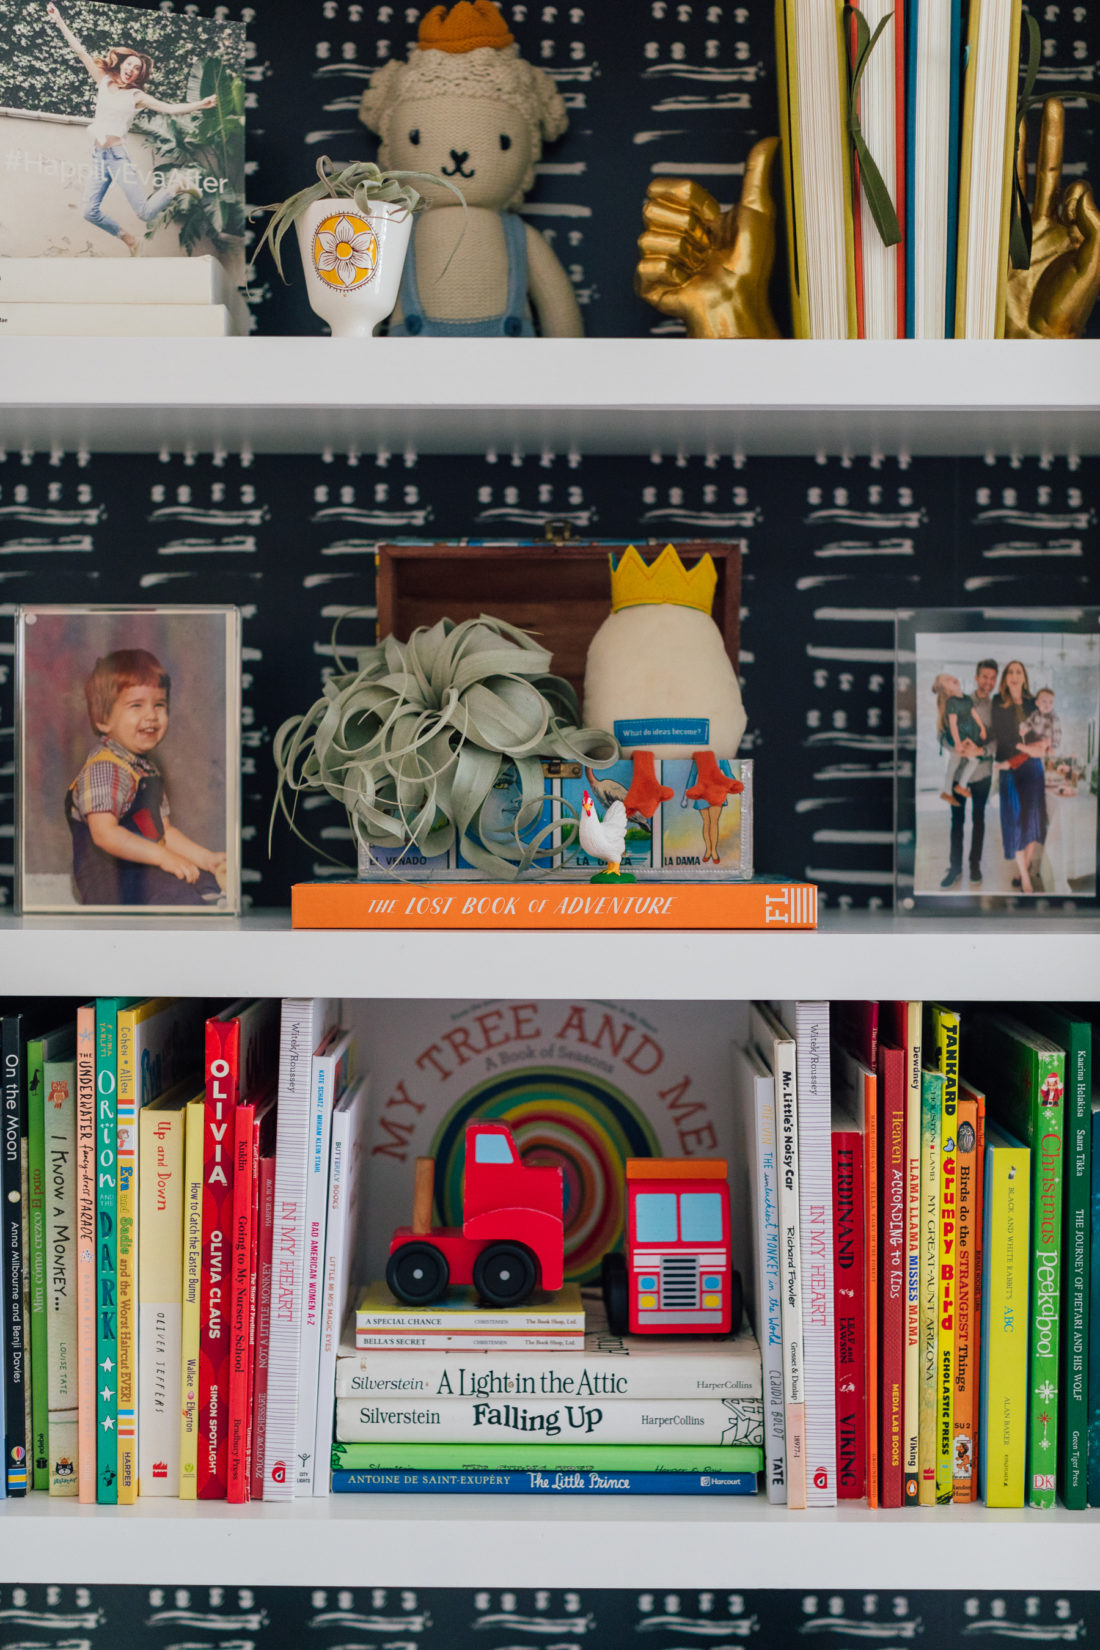 Bookcases in the playroom of Eva Amurri Martino's newly renovated Westport CT home